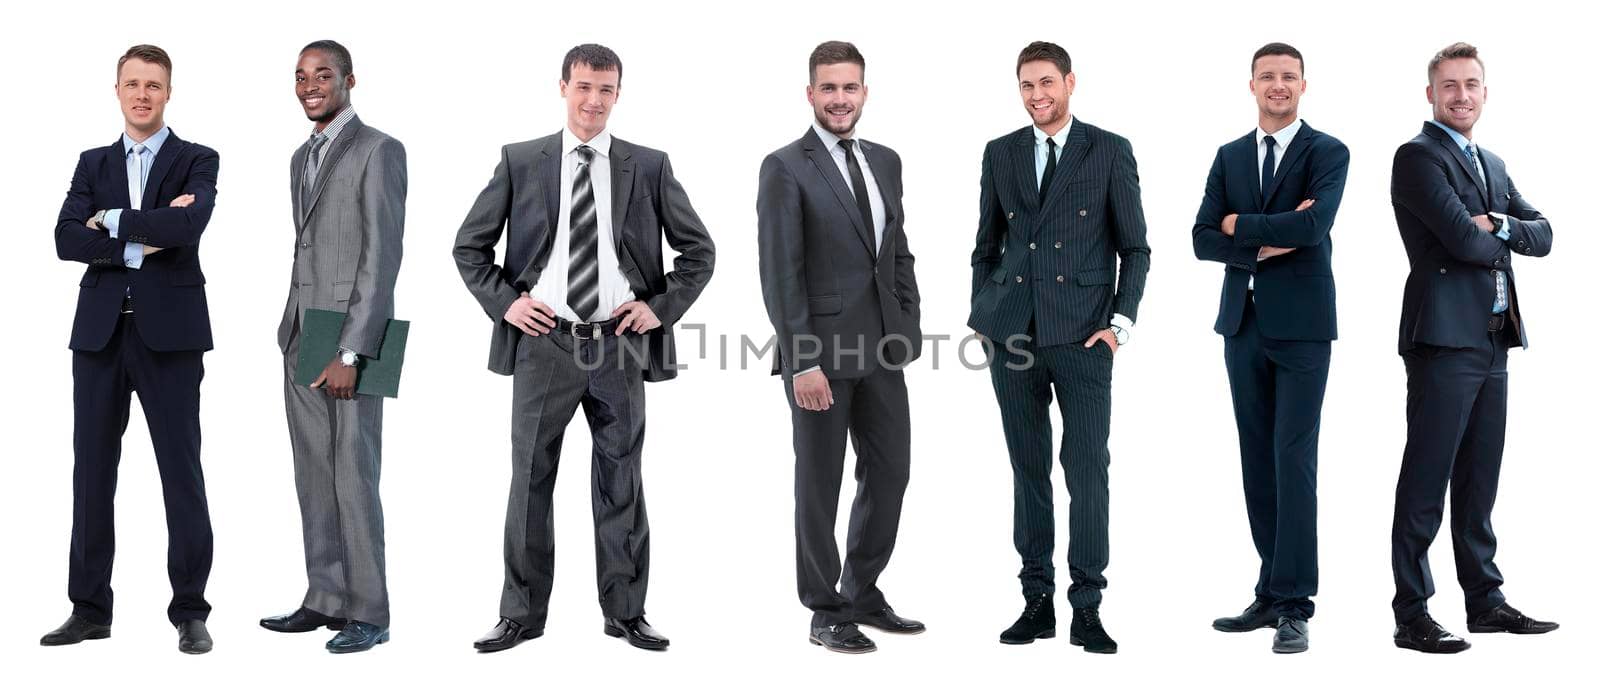 Group of smiling business people. Businessman and woman team